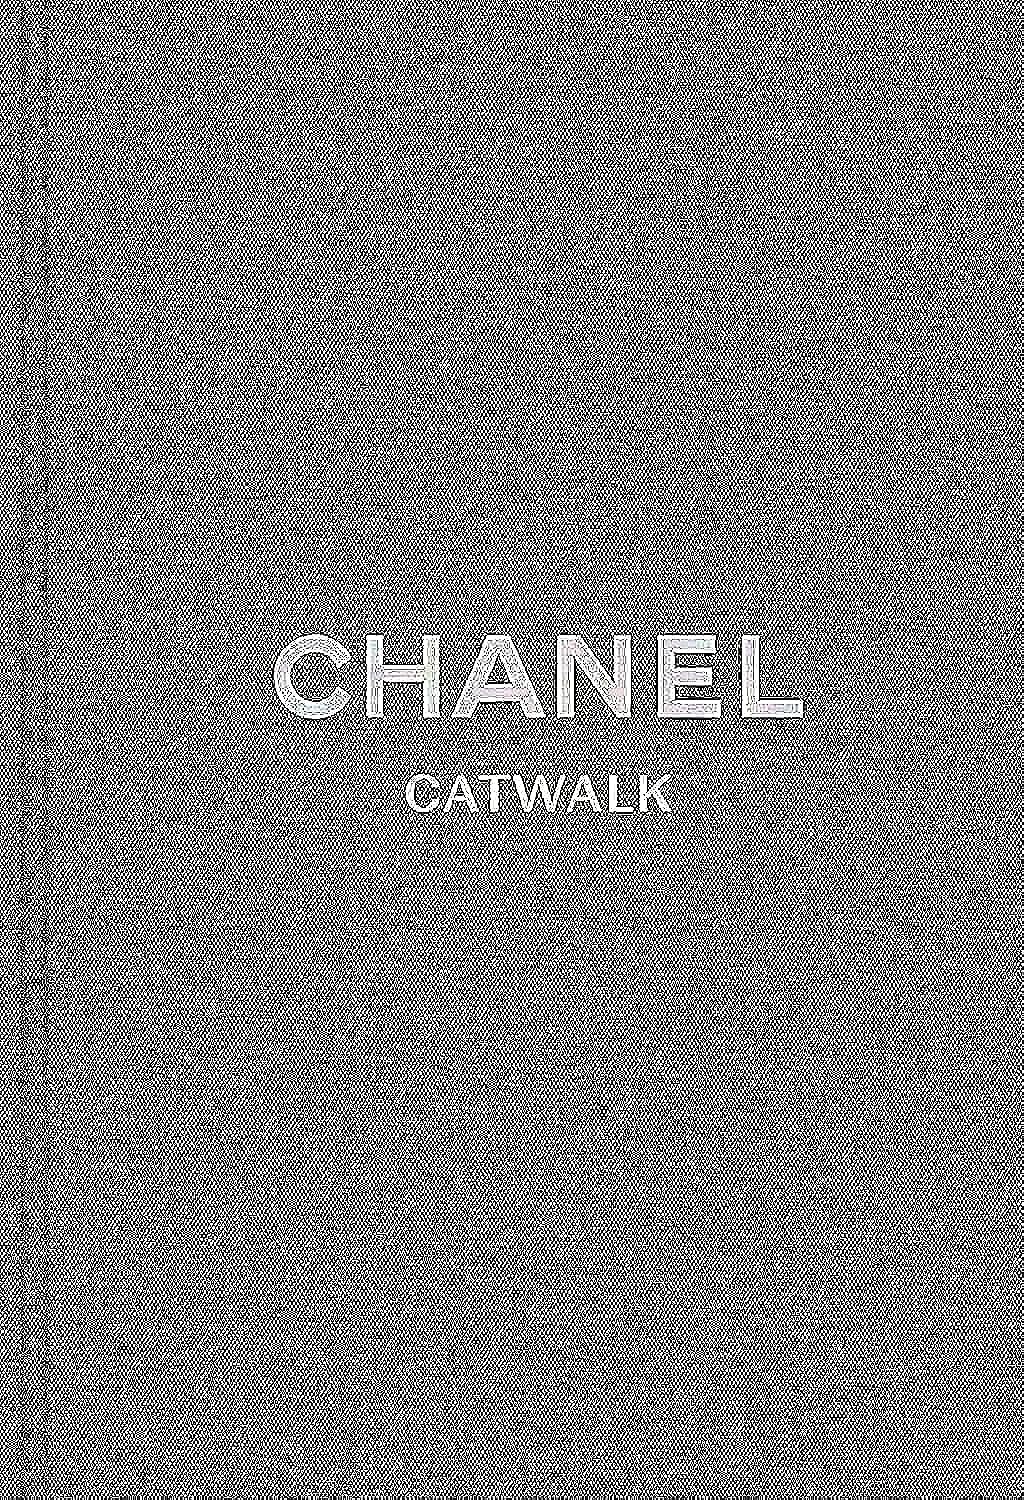 CHANEL CATWALK :THE COMPLETE COLLECTIONS